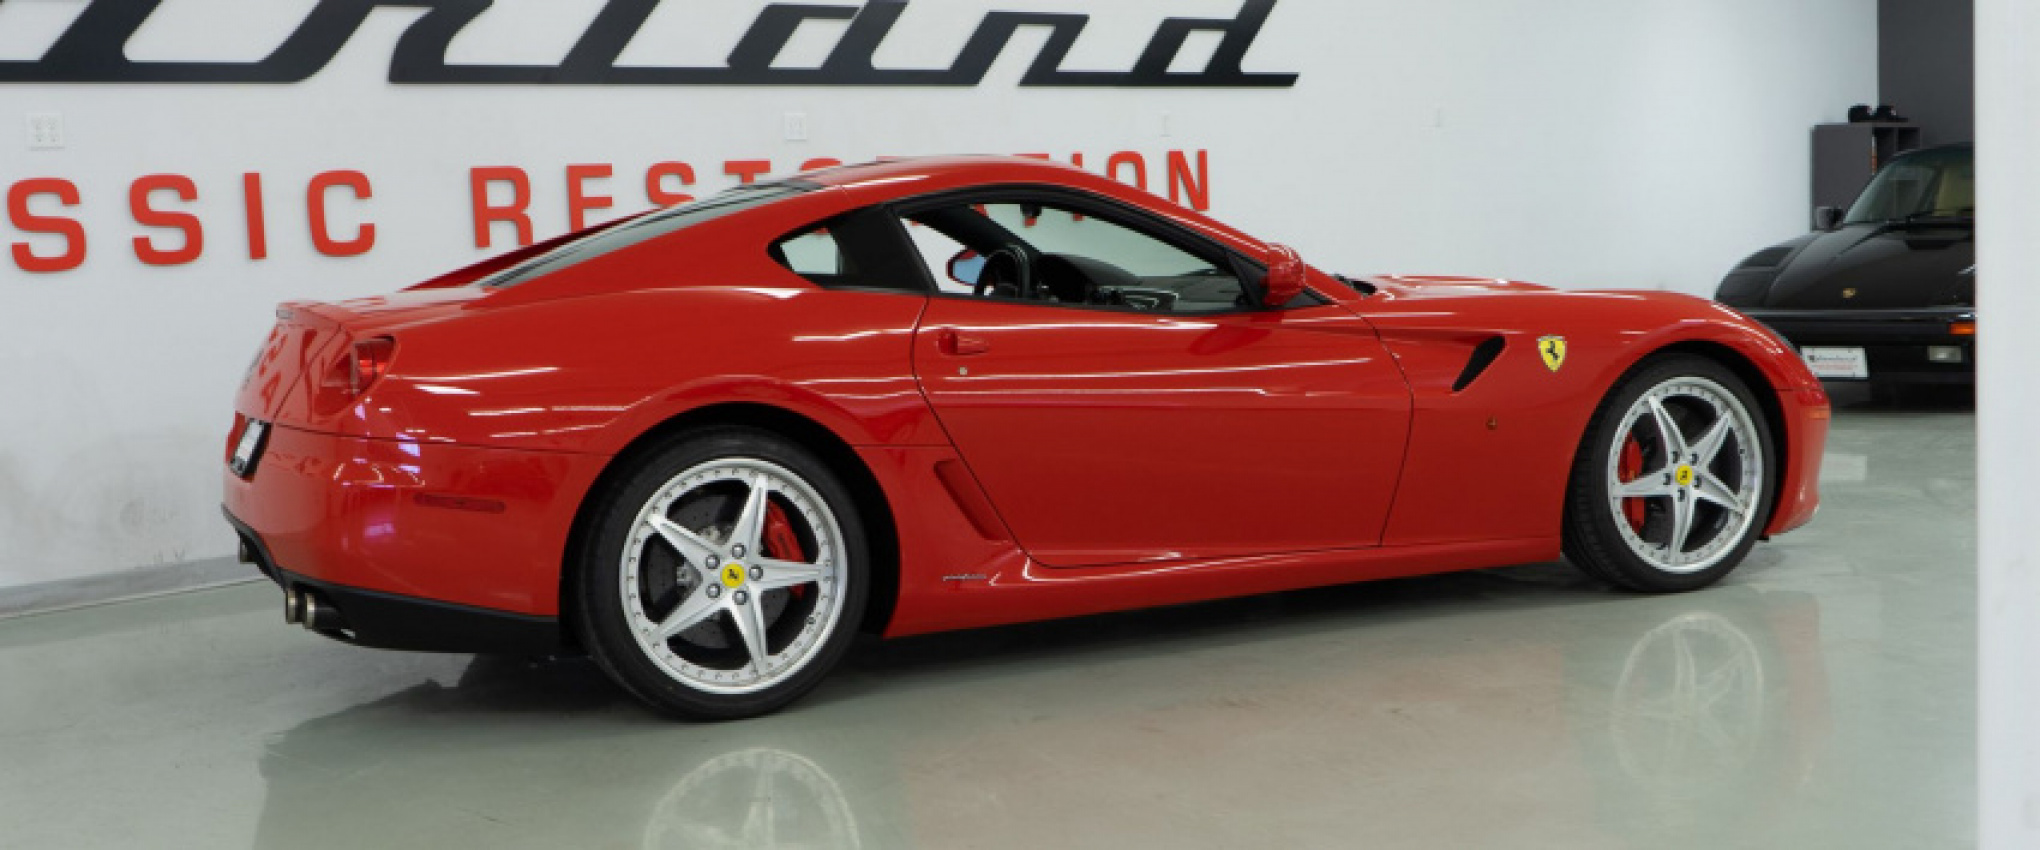 autos, cars, ferrari, american, asian, celebrity, classic, client, europe, exotic, features, handpicked, luxury, modern classic, muscle, news, newsletter, off-road, sports, trucks, 2010 ferrari gtb fiorano checks all the boxes